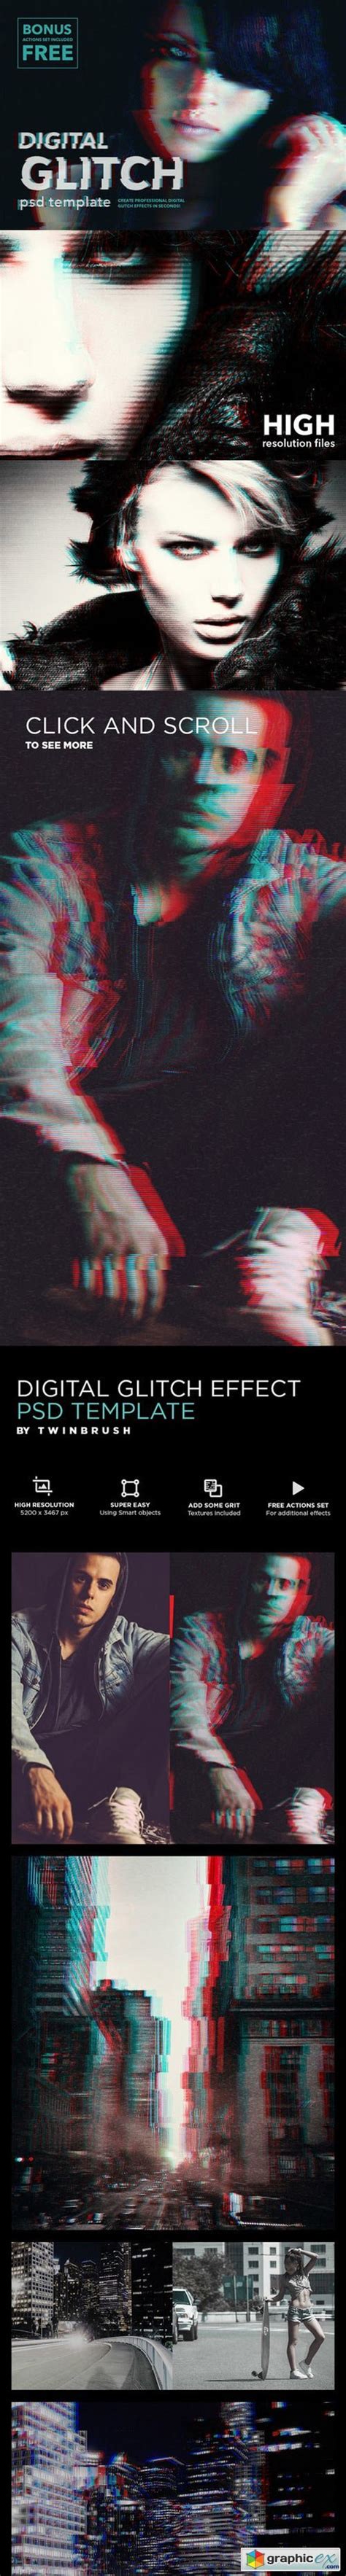 Digital Glitch Effect Psd Templates Free Download Vector Stock Image